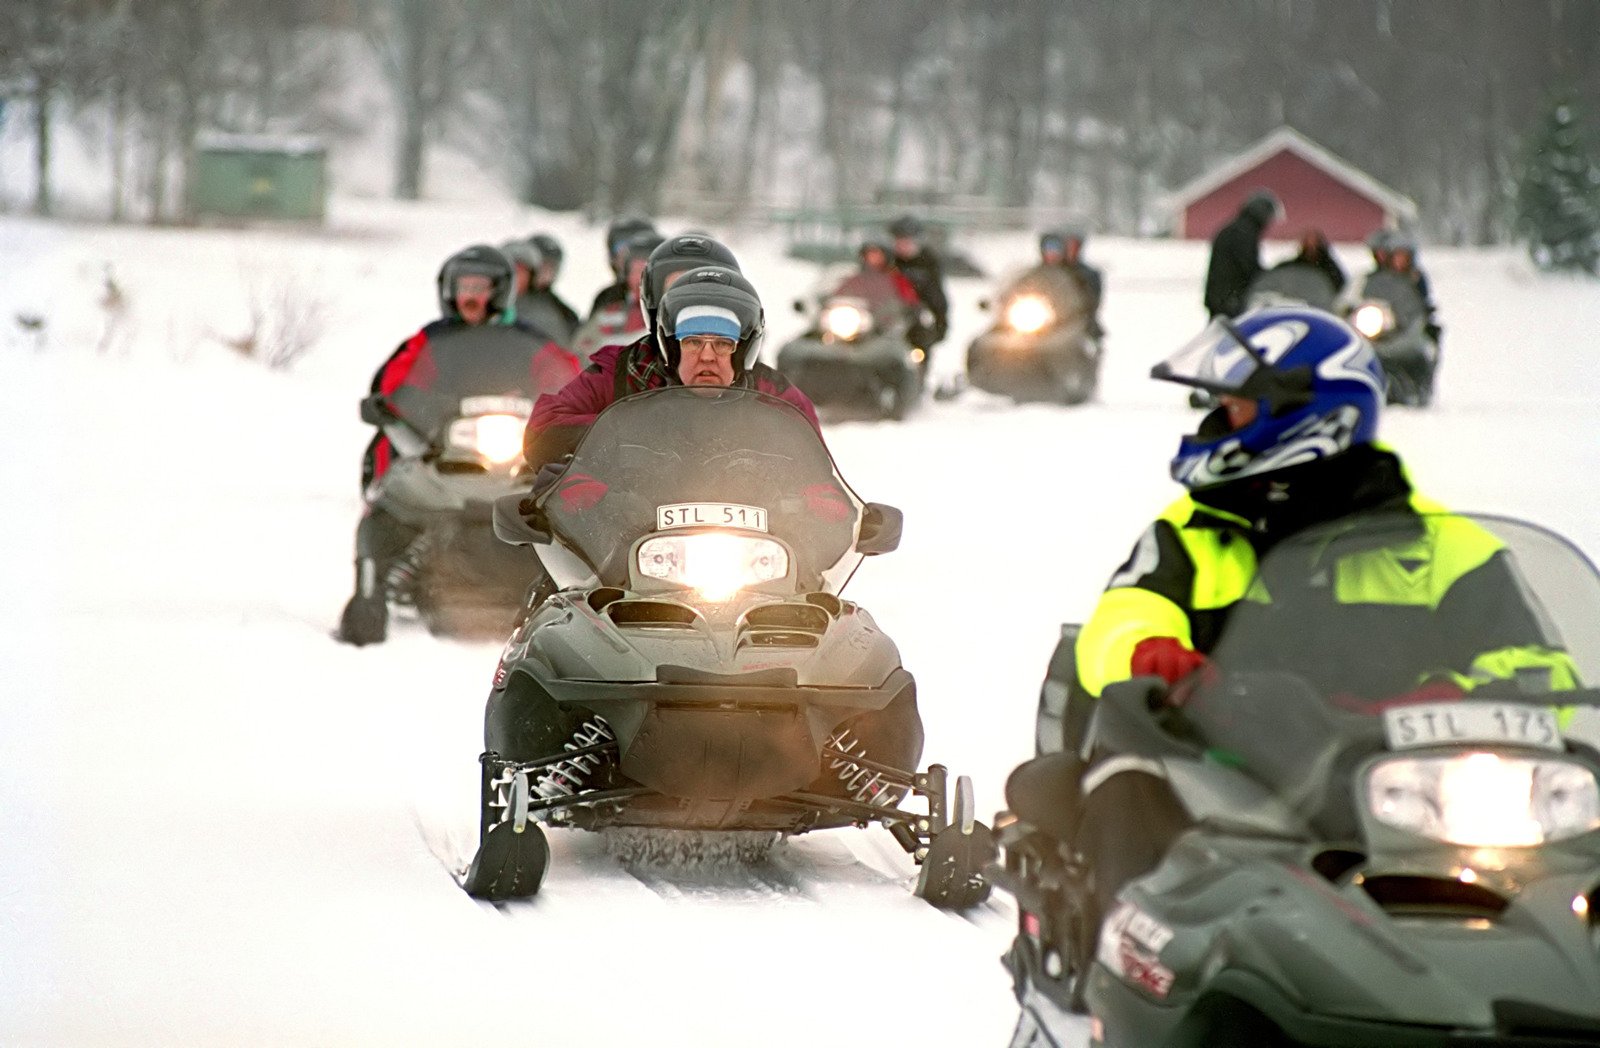 We are buying snowmobiles right now!